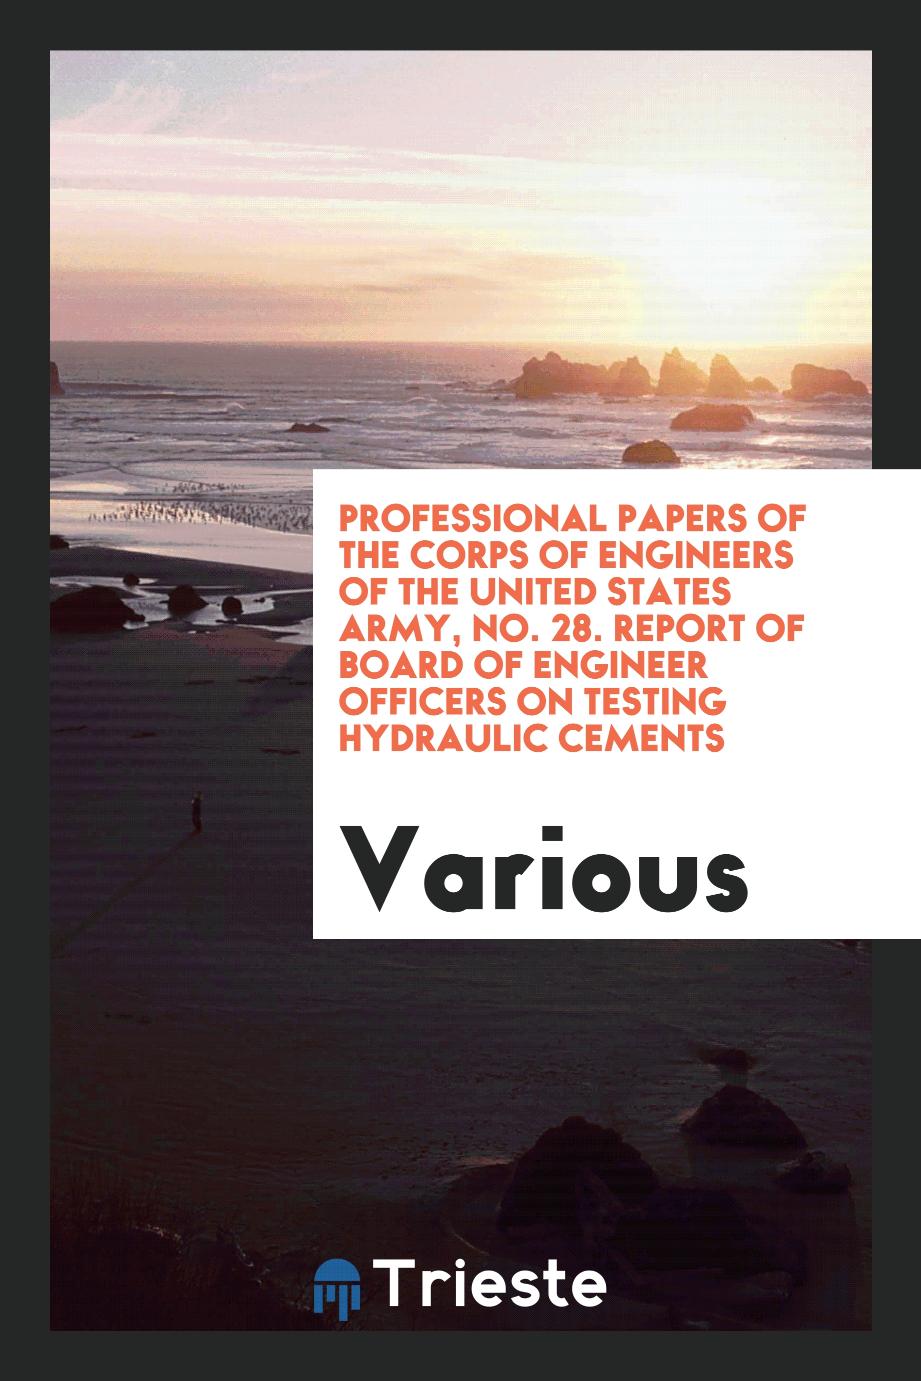 Professional papers of the Corps of Engineers of the United States Army, No. 28. Report of board of engineer officers on testing hydraulic cements